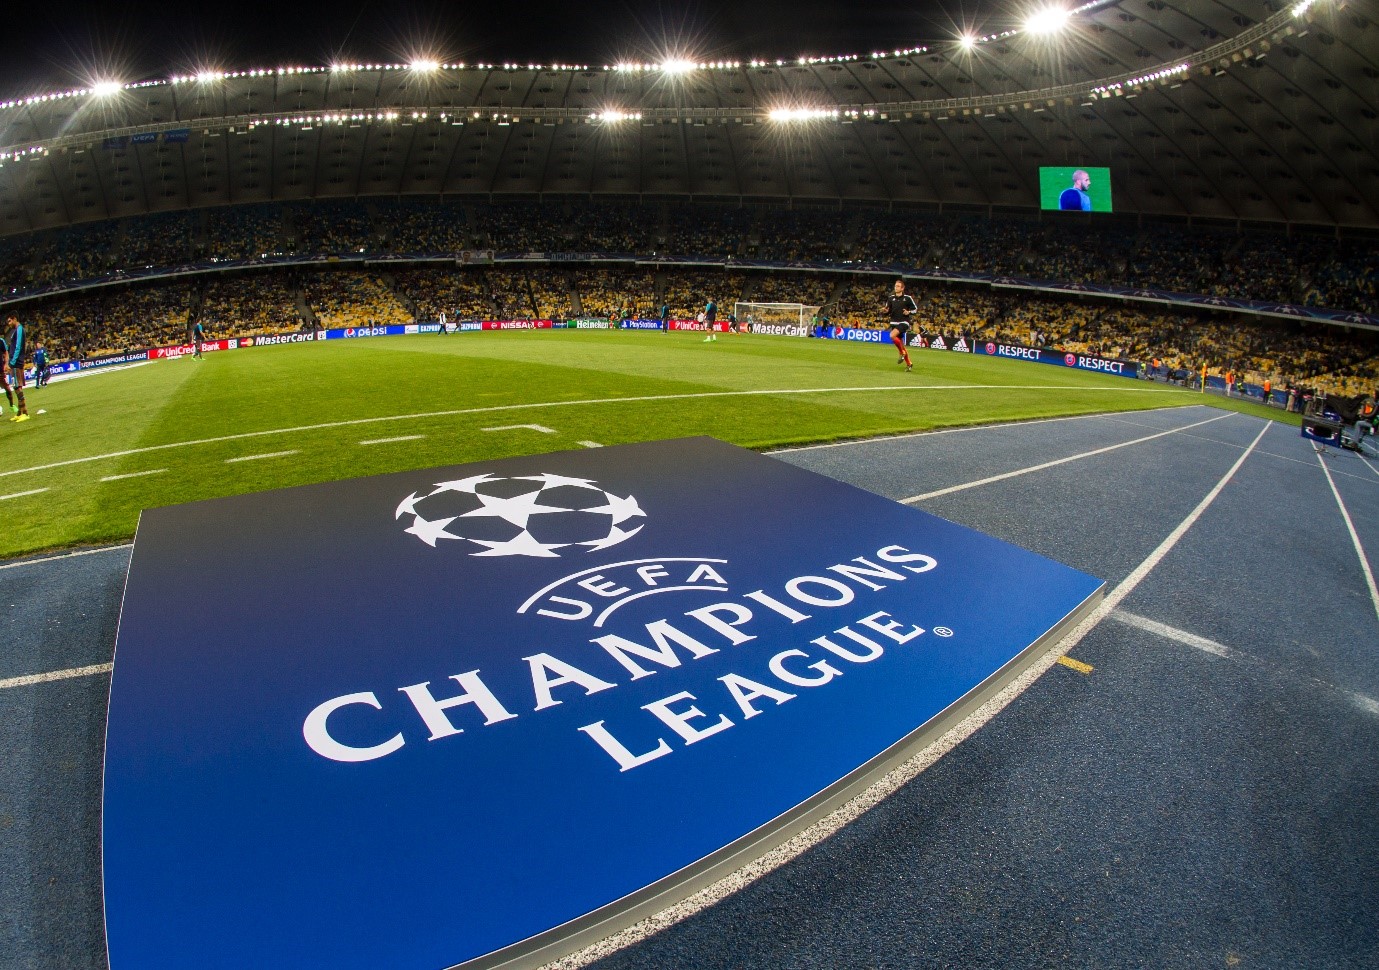 Champions League Qualifiers: Find the best odds at Non Gamstop Bookies